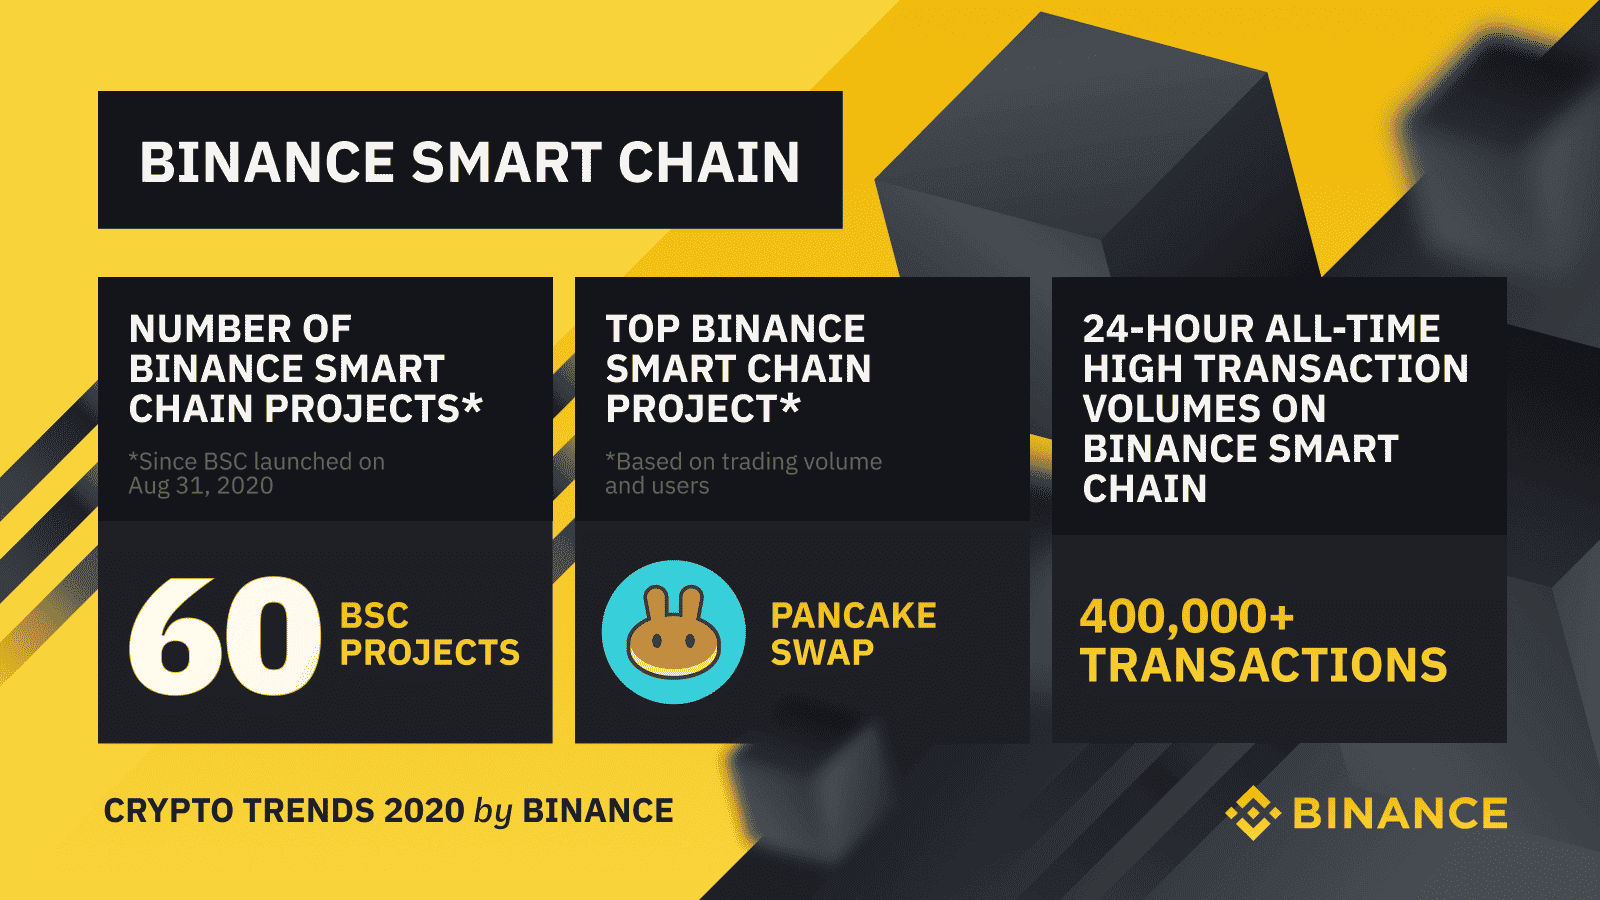 Binance DEFI "What is BSC & Pancake Swap all about?"